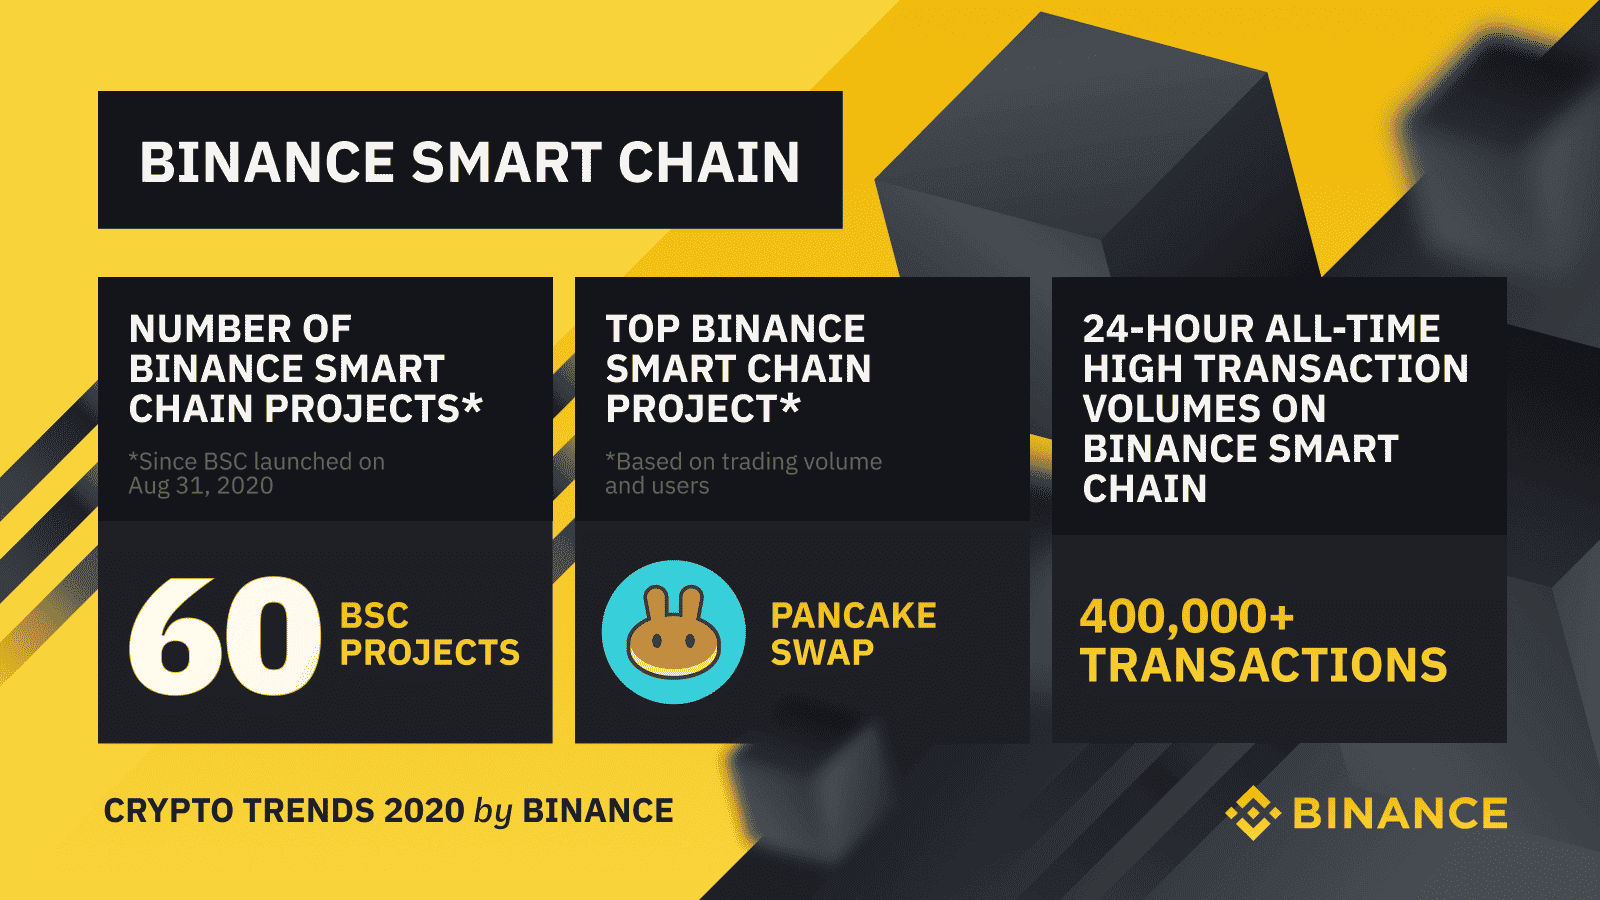 Binance DEFI "What is BSC & Pancake Swap all about?"